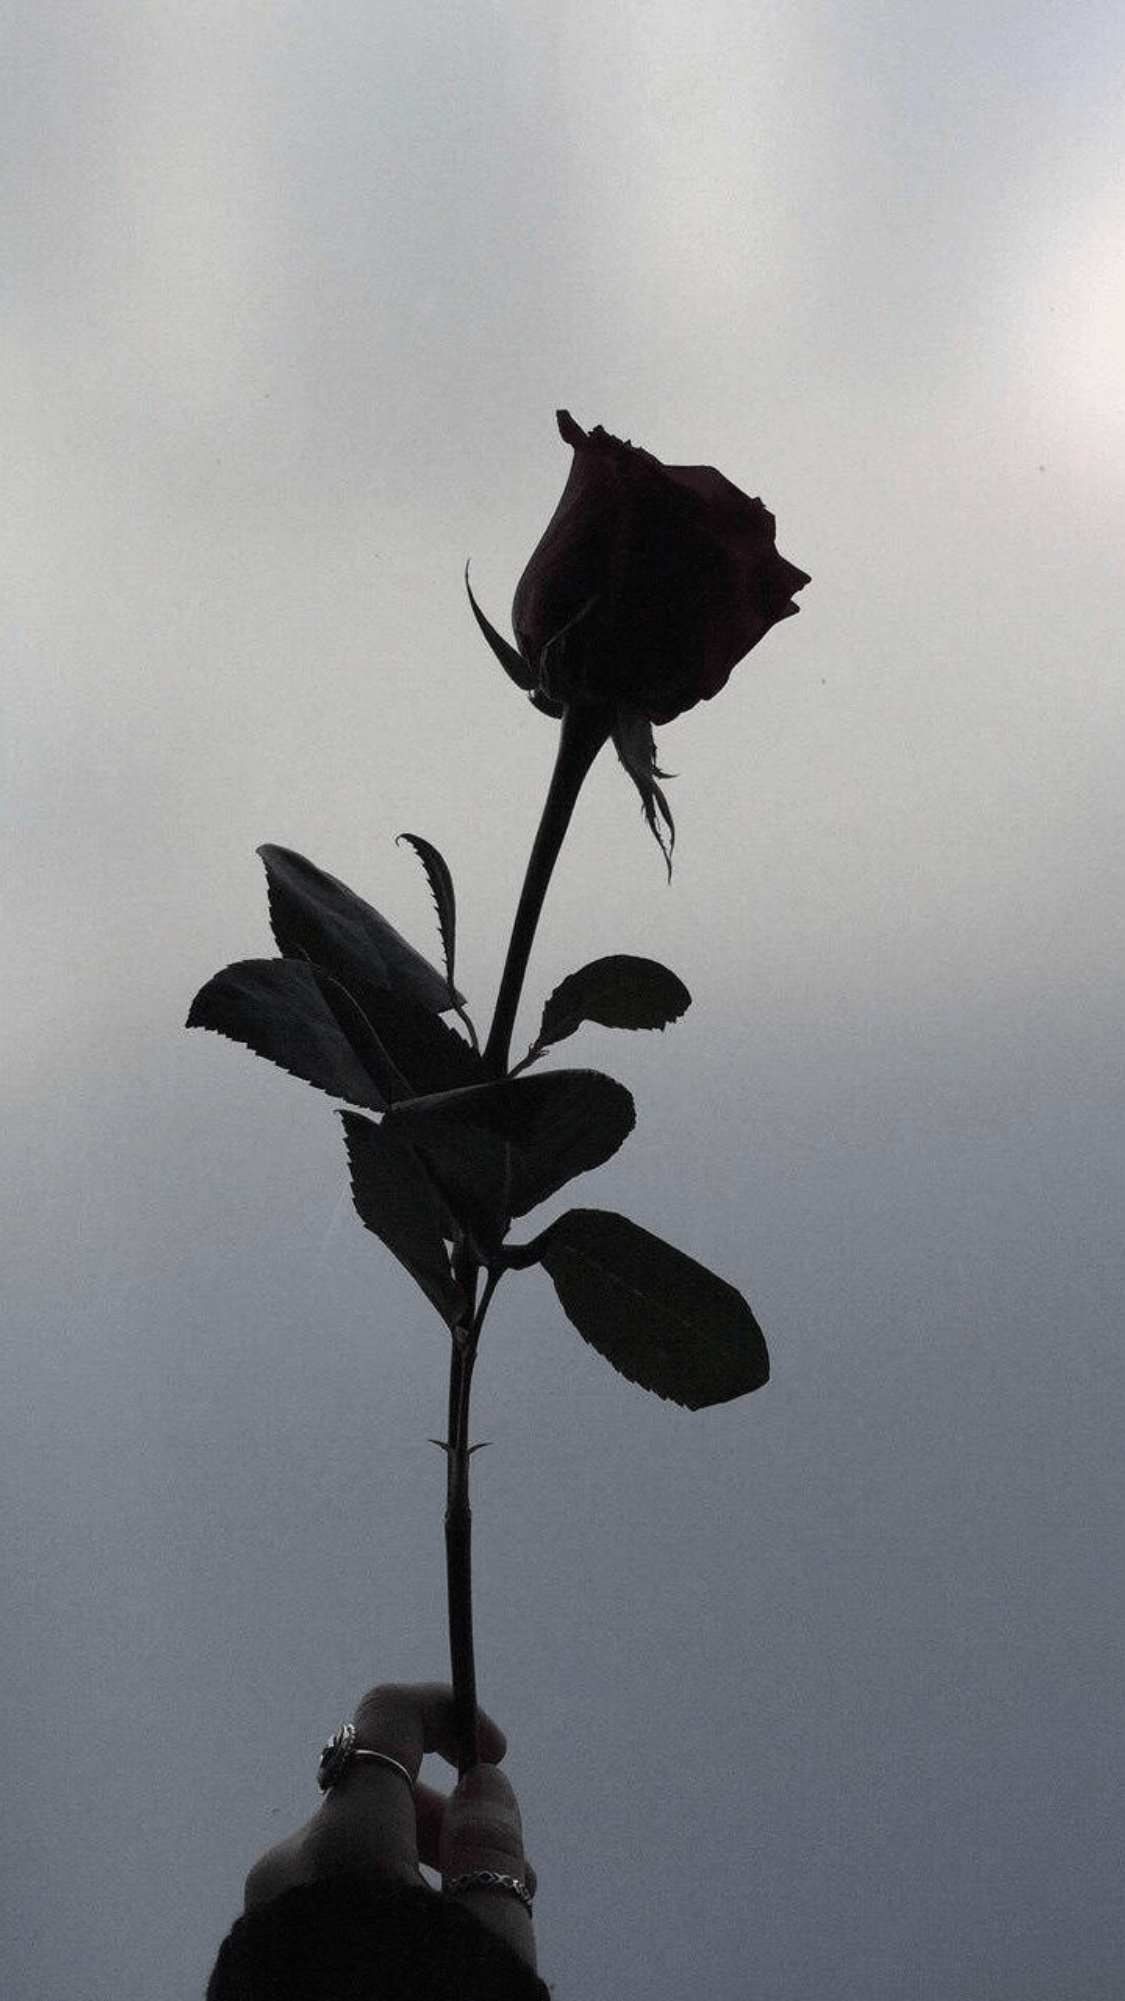 A person holding up the stem of rose - Profile picture